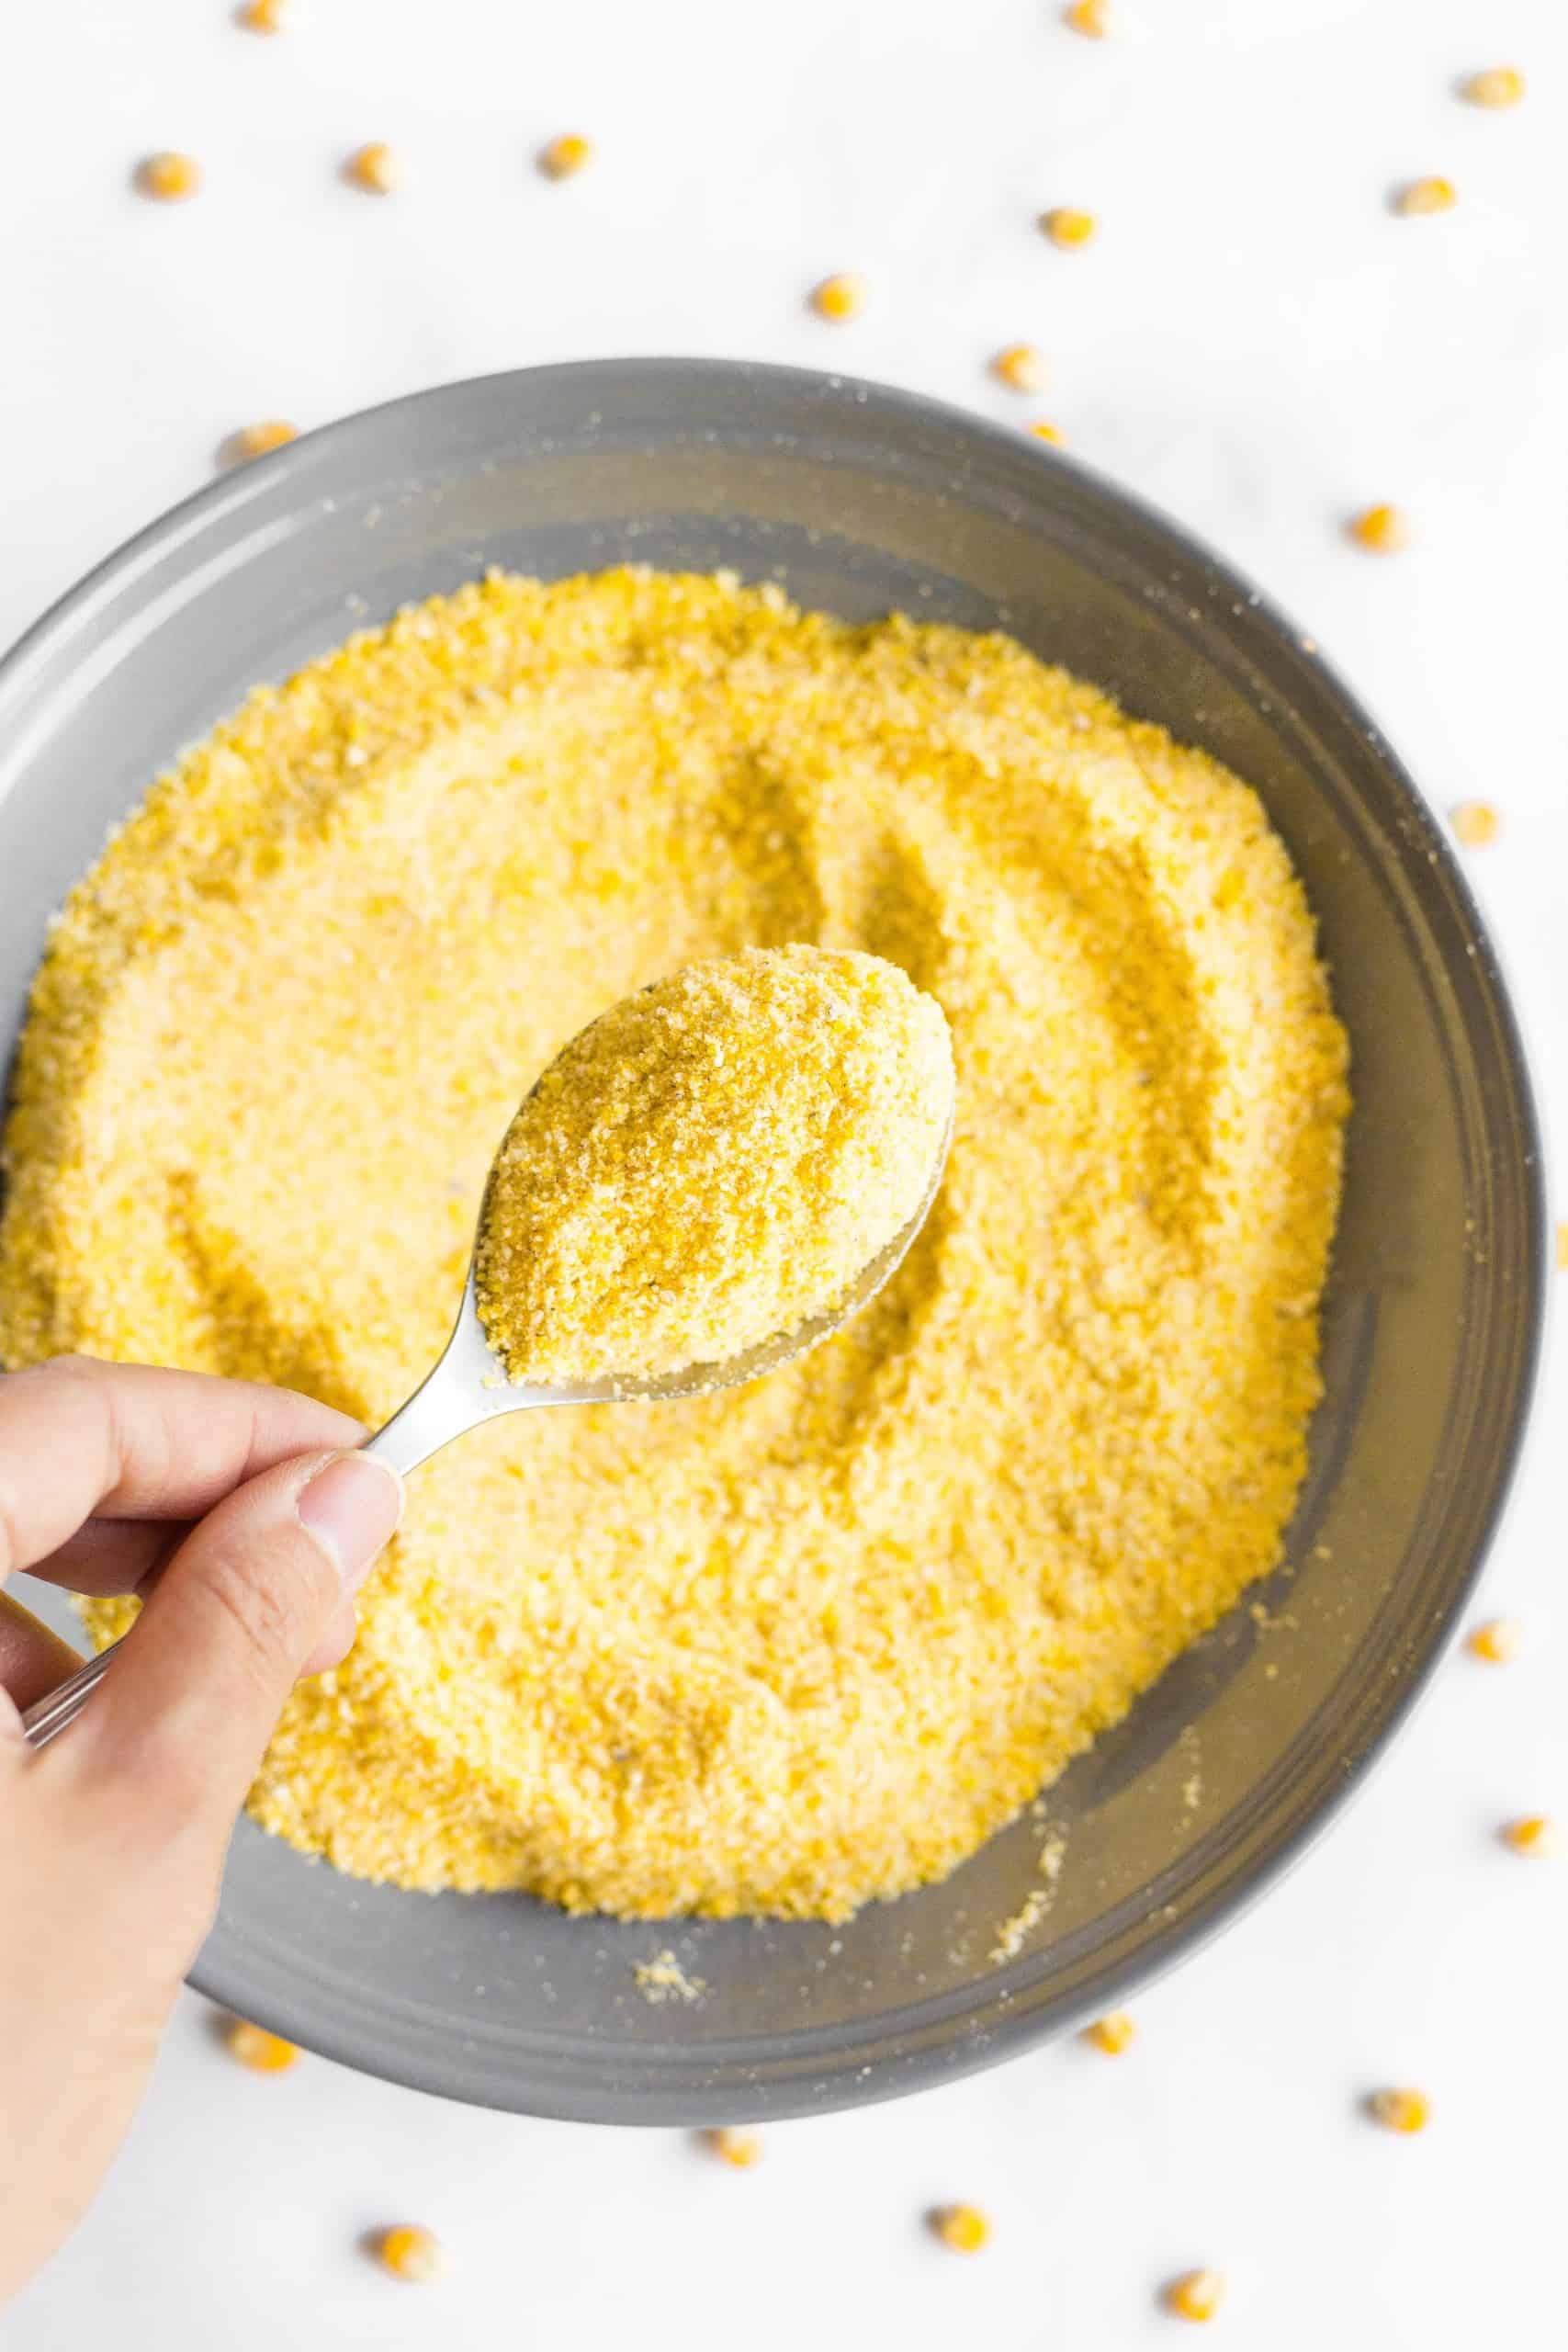 Hand holding up a spoonful of homemade cornmeal from a bowl.